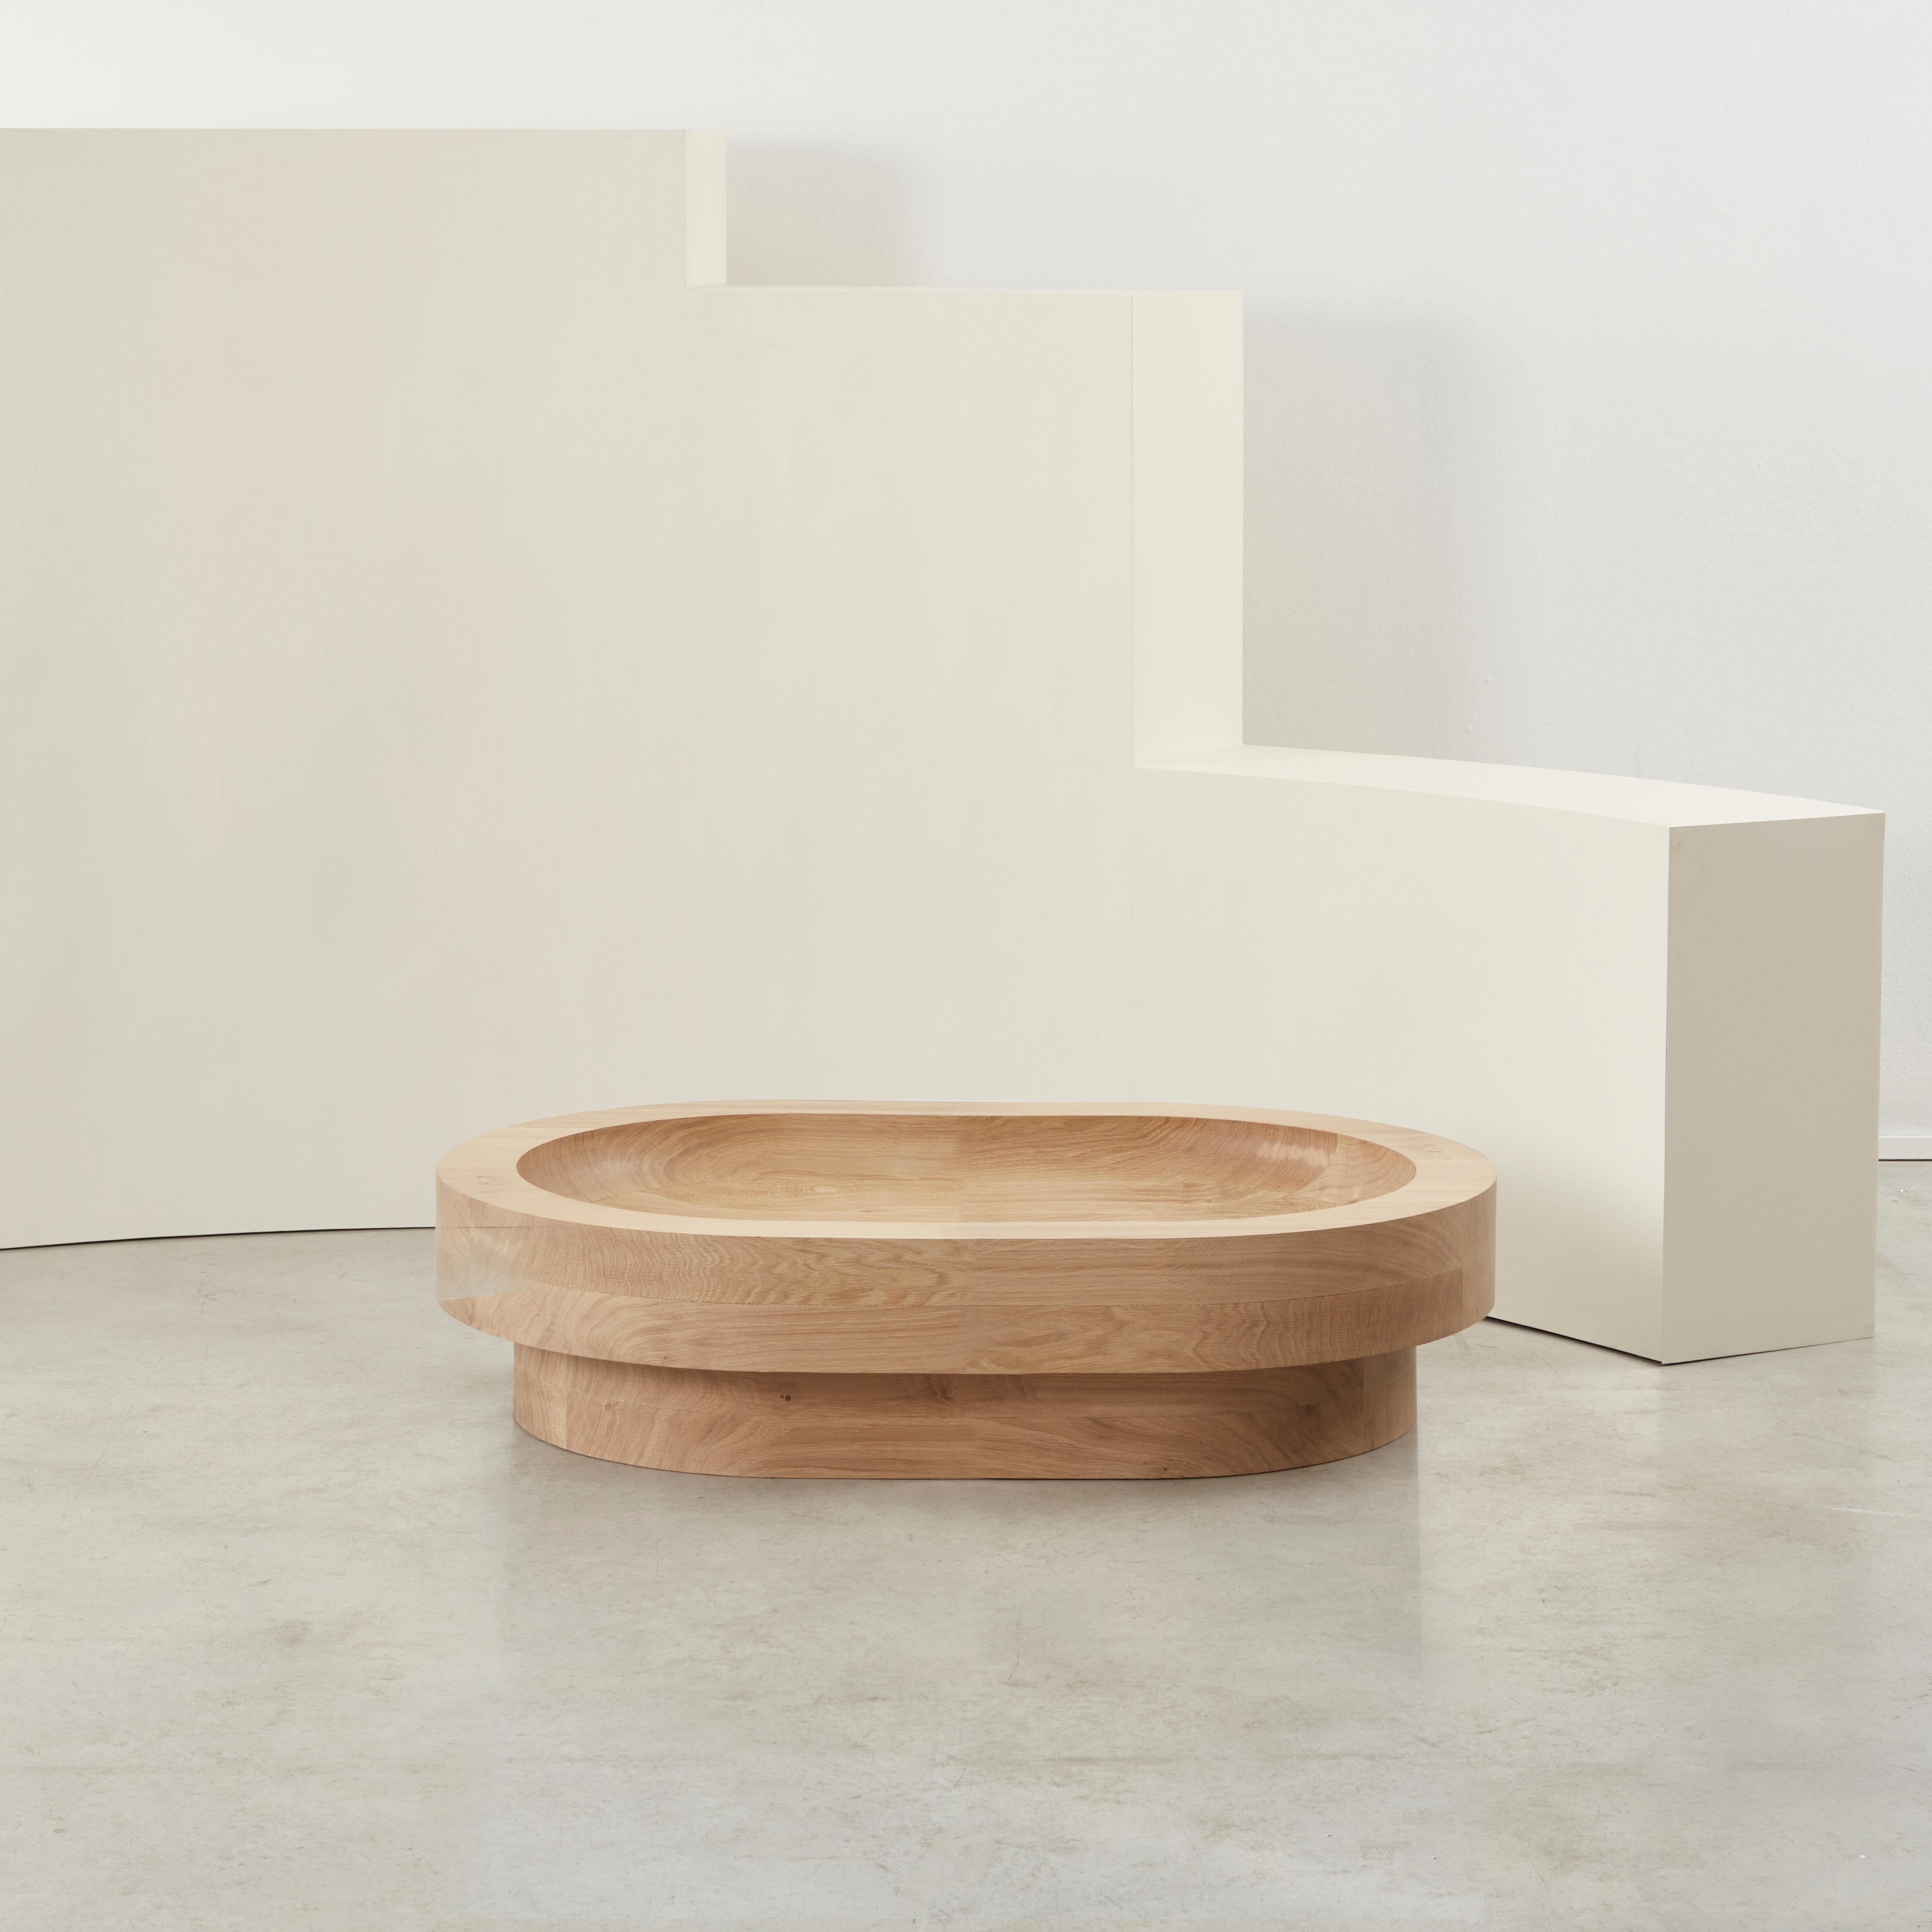 Benni Allan 'Low Table Two' in oak by EBBA, UK, 2022 For Sale 1